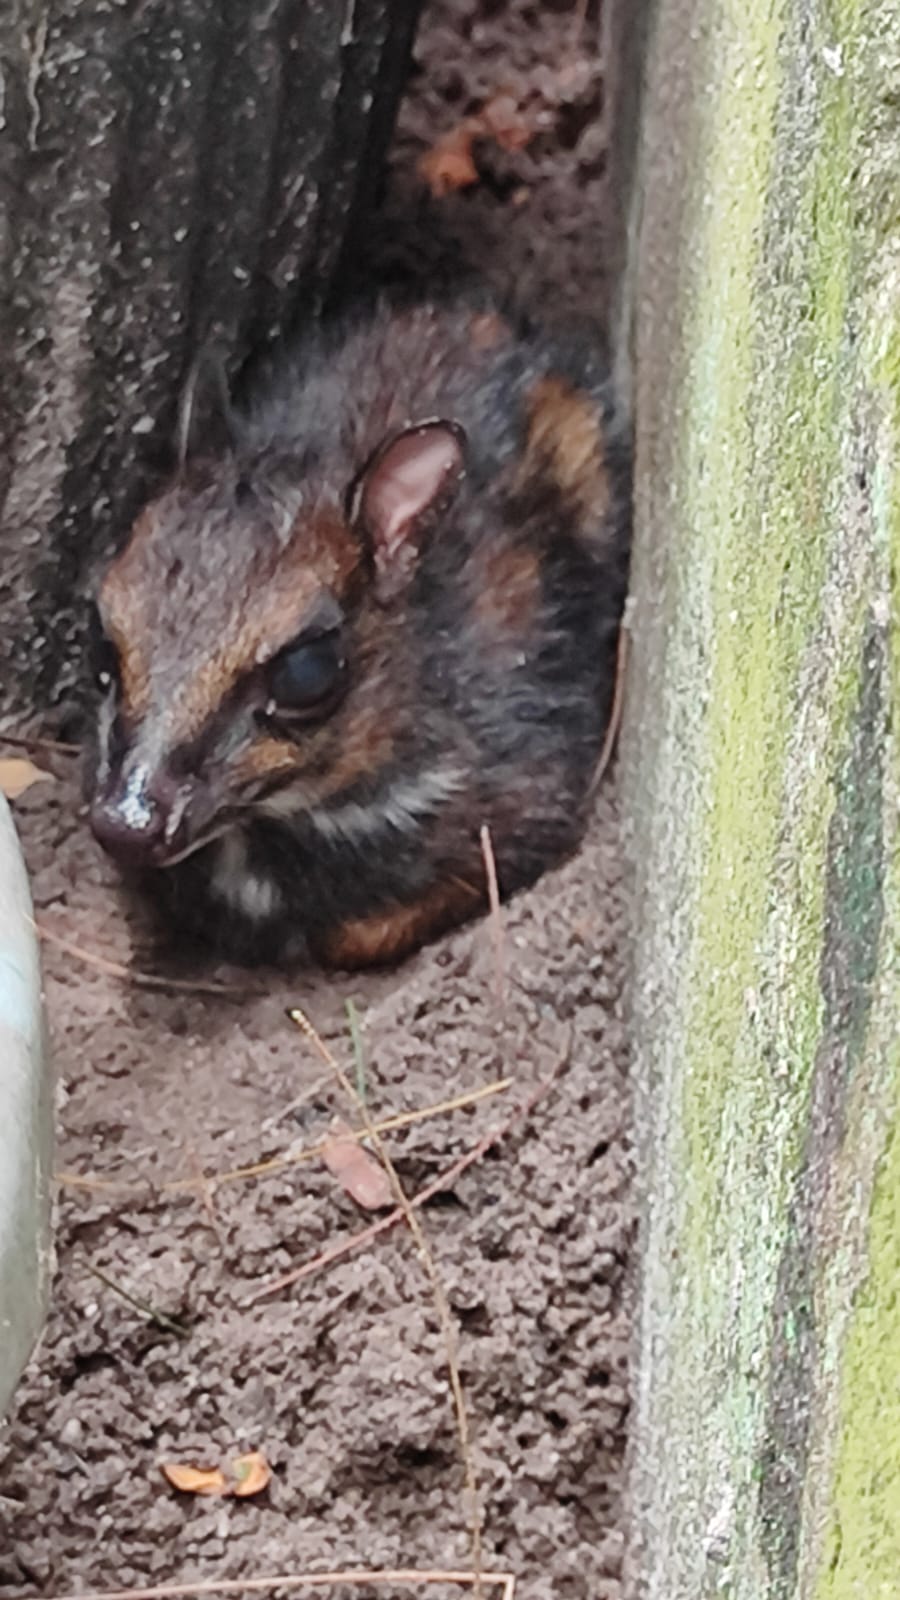 You are currently viewing Newborn Uja Brings Hope for Endangered Bangka Mouse Deer Conservation